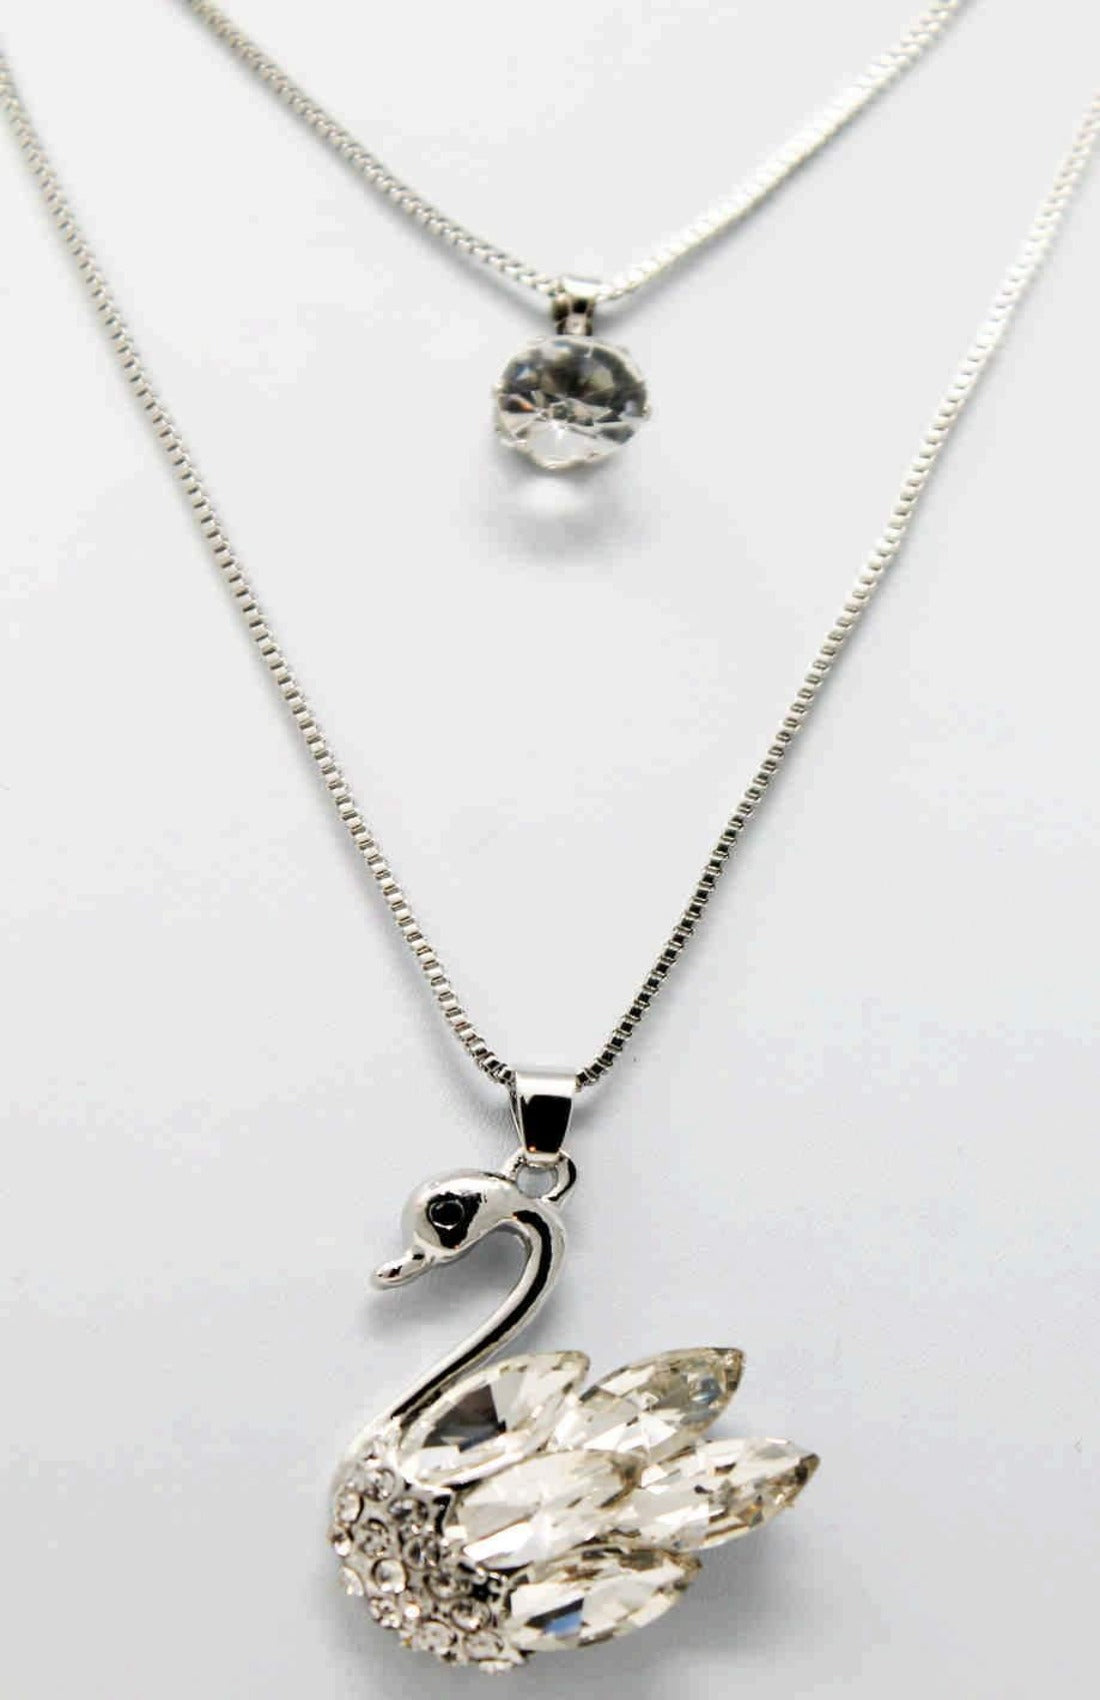 Rhinestones Studded Duck Design Imitation Fashion Metal Double Pendant with Long Chain for Girls